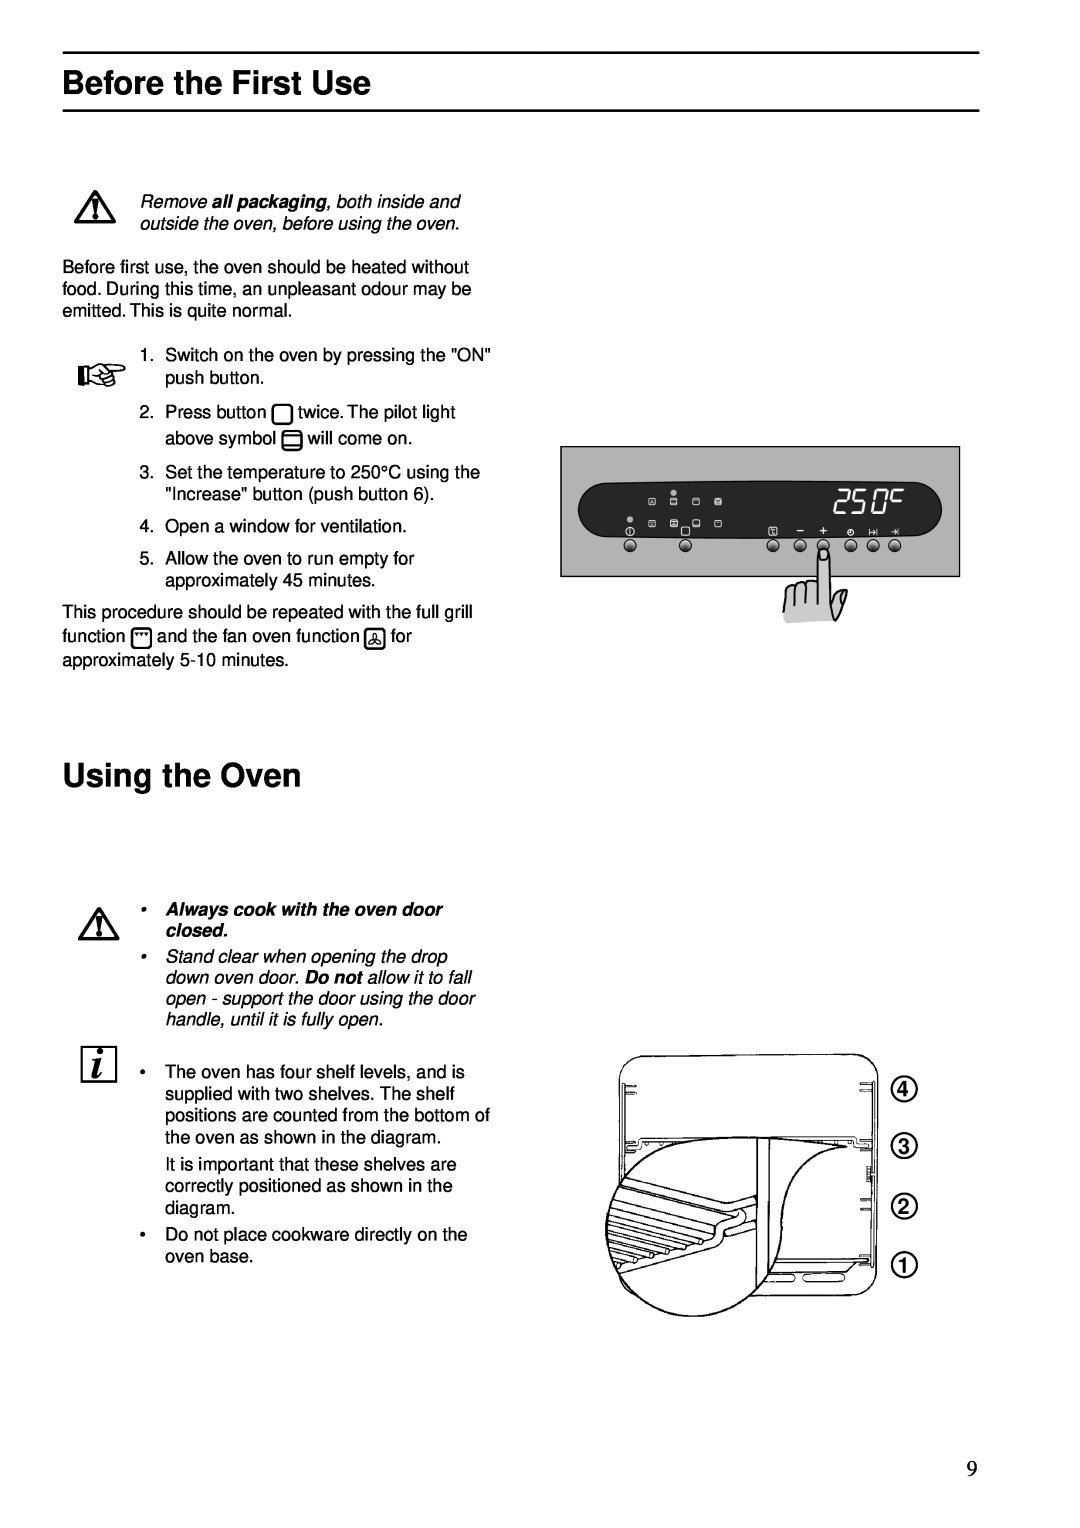 Zanussi ZBS 772 manual Before the First Use, Using the Oven, Always cook with the oven door closed 